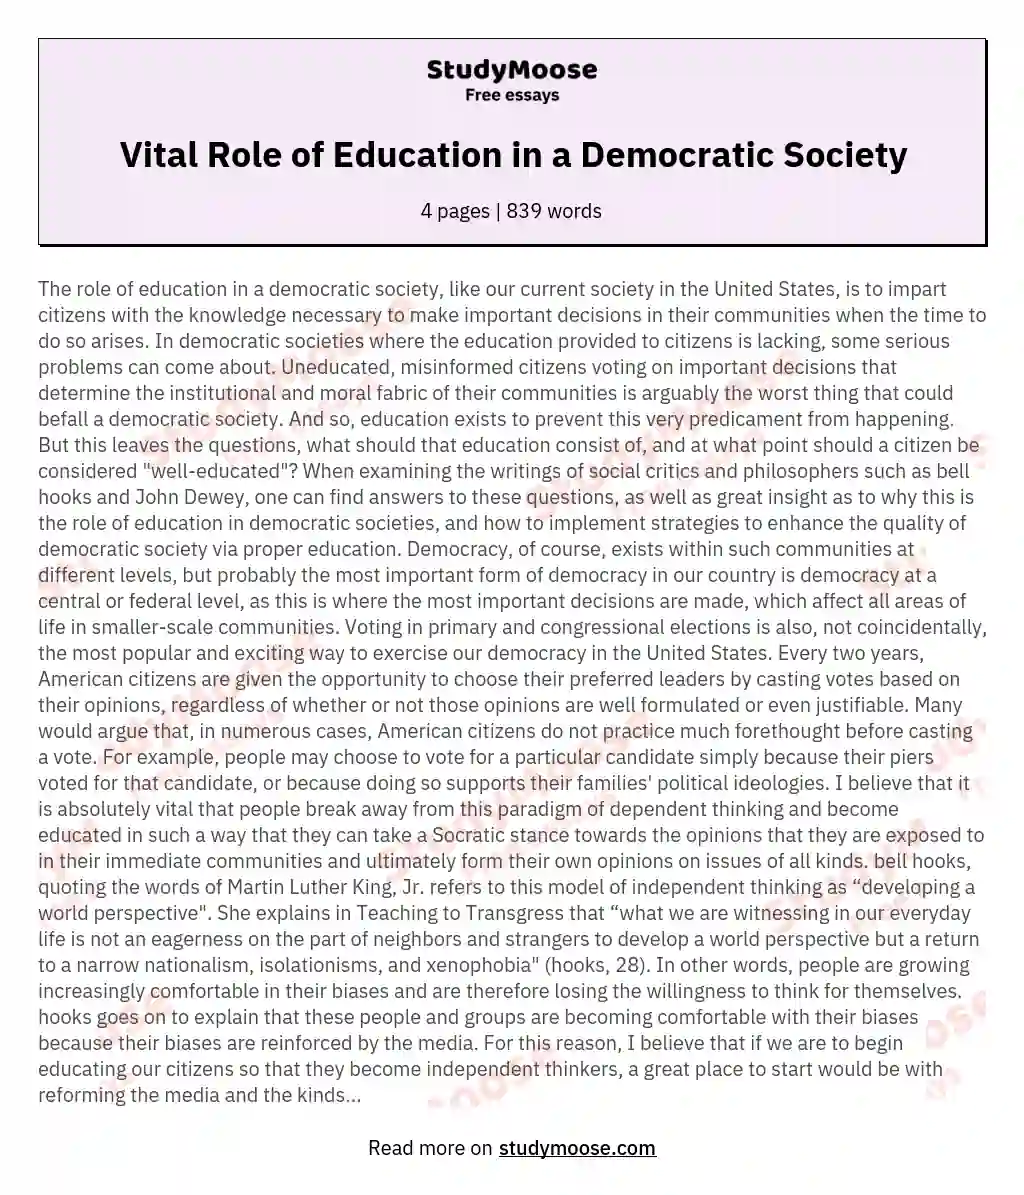 Vital Role of Education in a Democratic Society